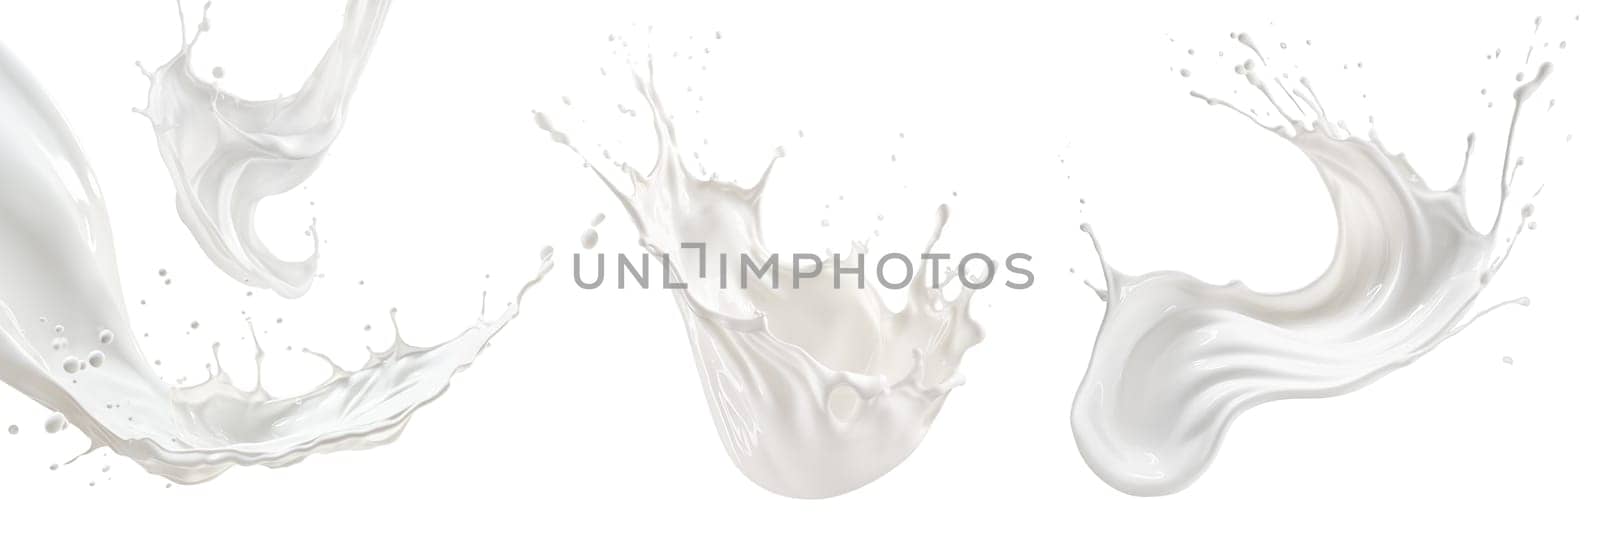 Set of milk splashes isolated on transparent background. Milk splashes and drops flying in different directions isolated on a white background. High quality photo